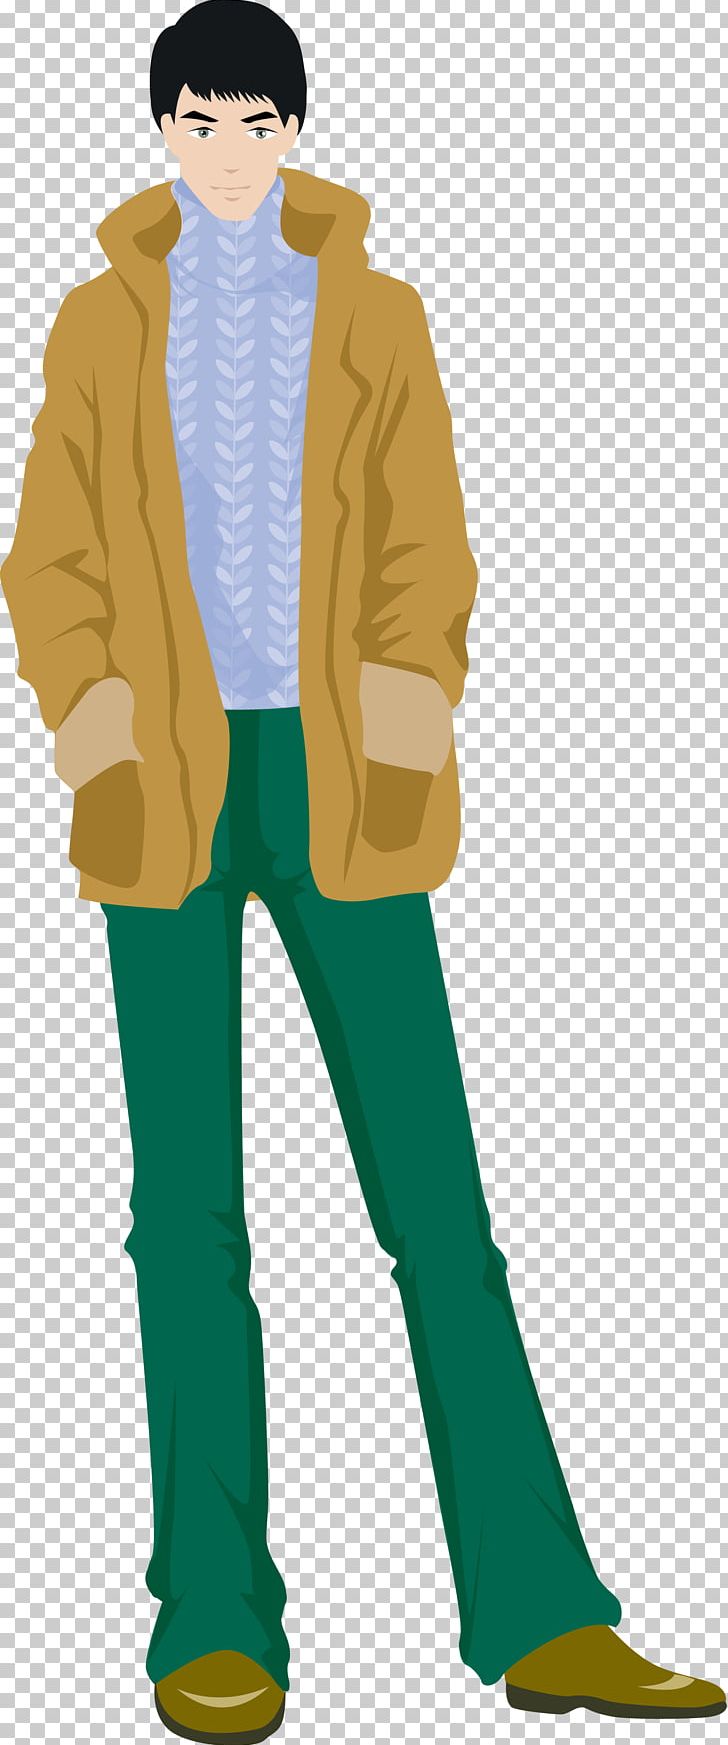 Illustrator Clothing PNG, Clipart, Art, Boy, Clothing, Cool, Costume Design Free PNG Download